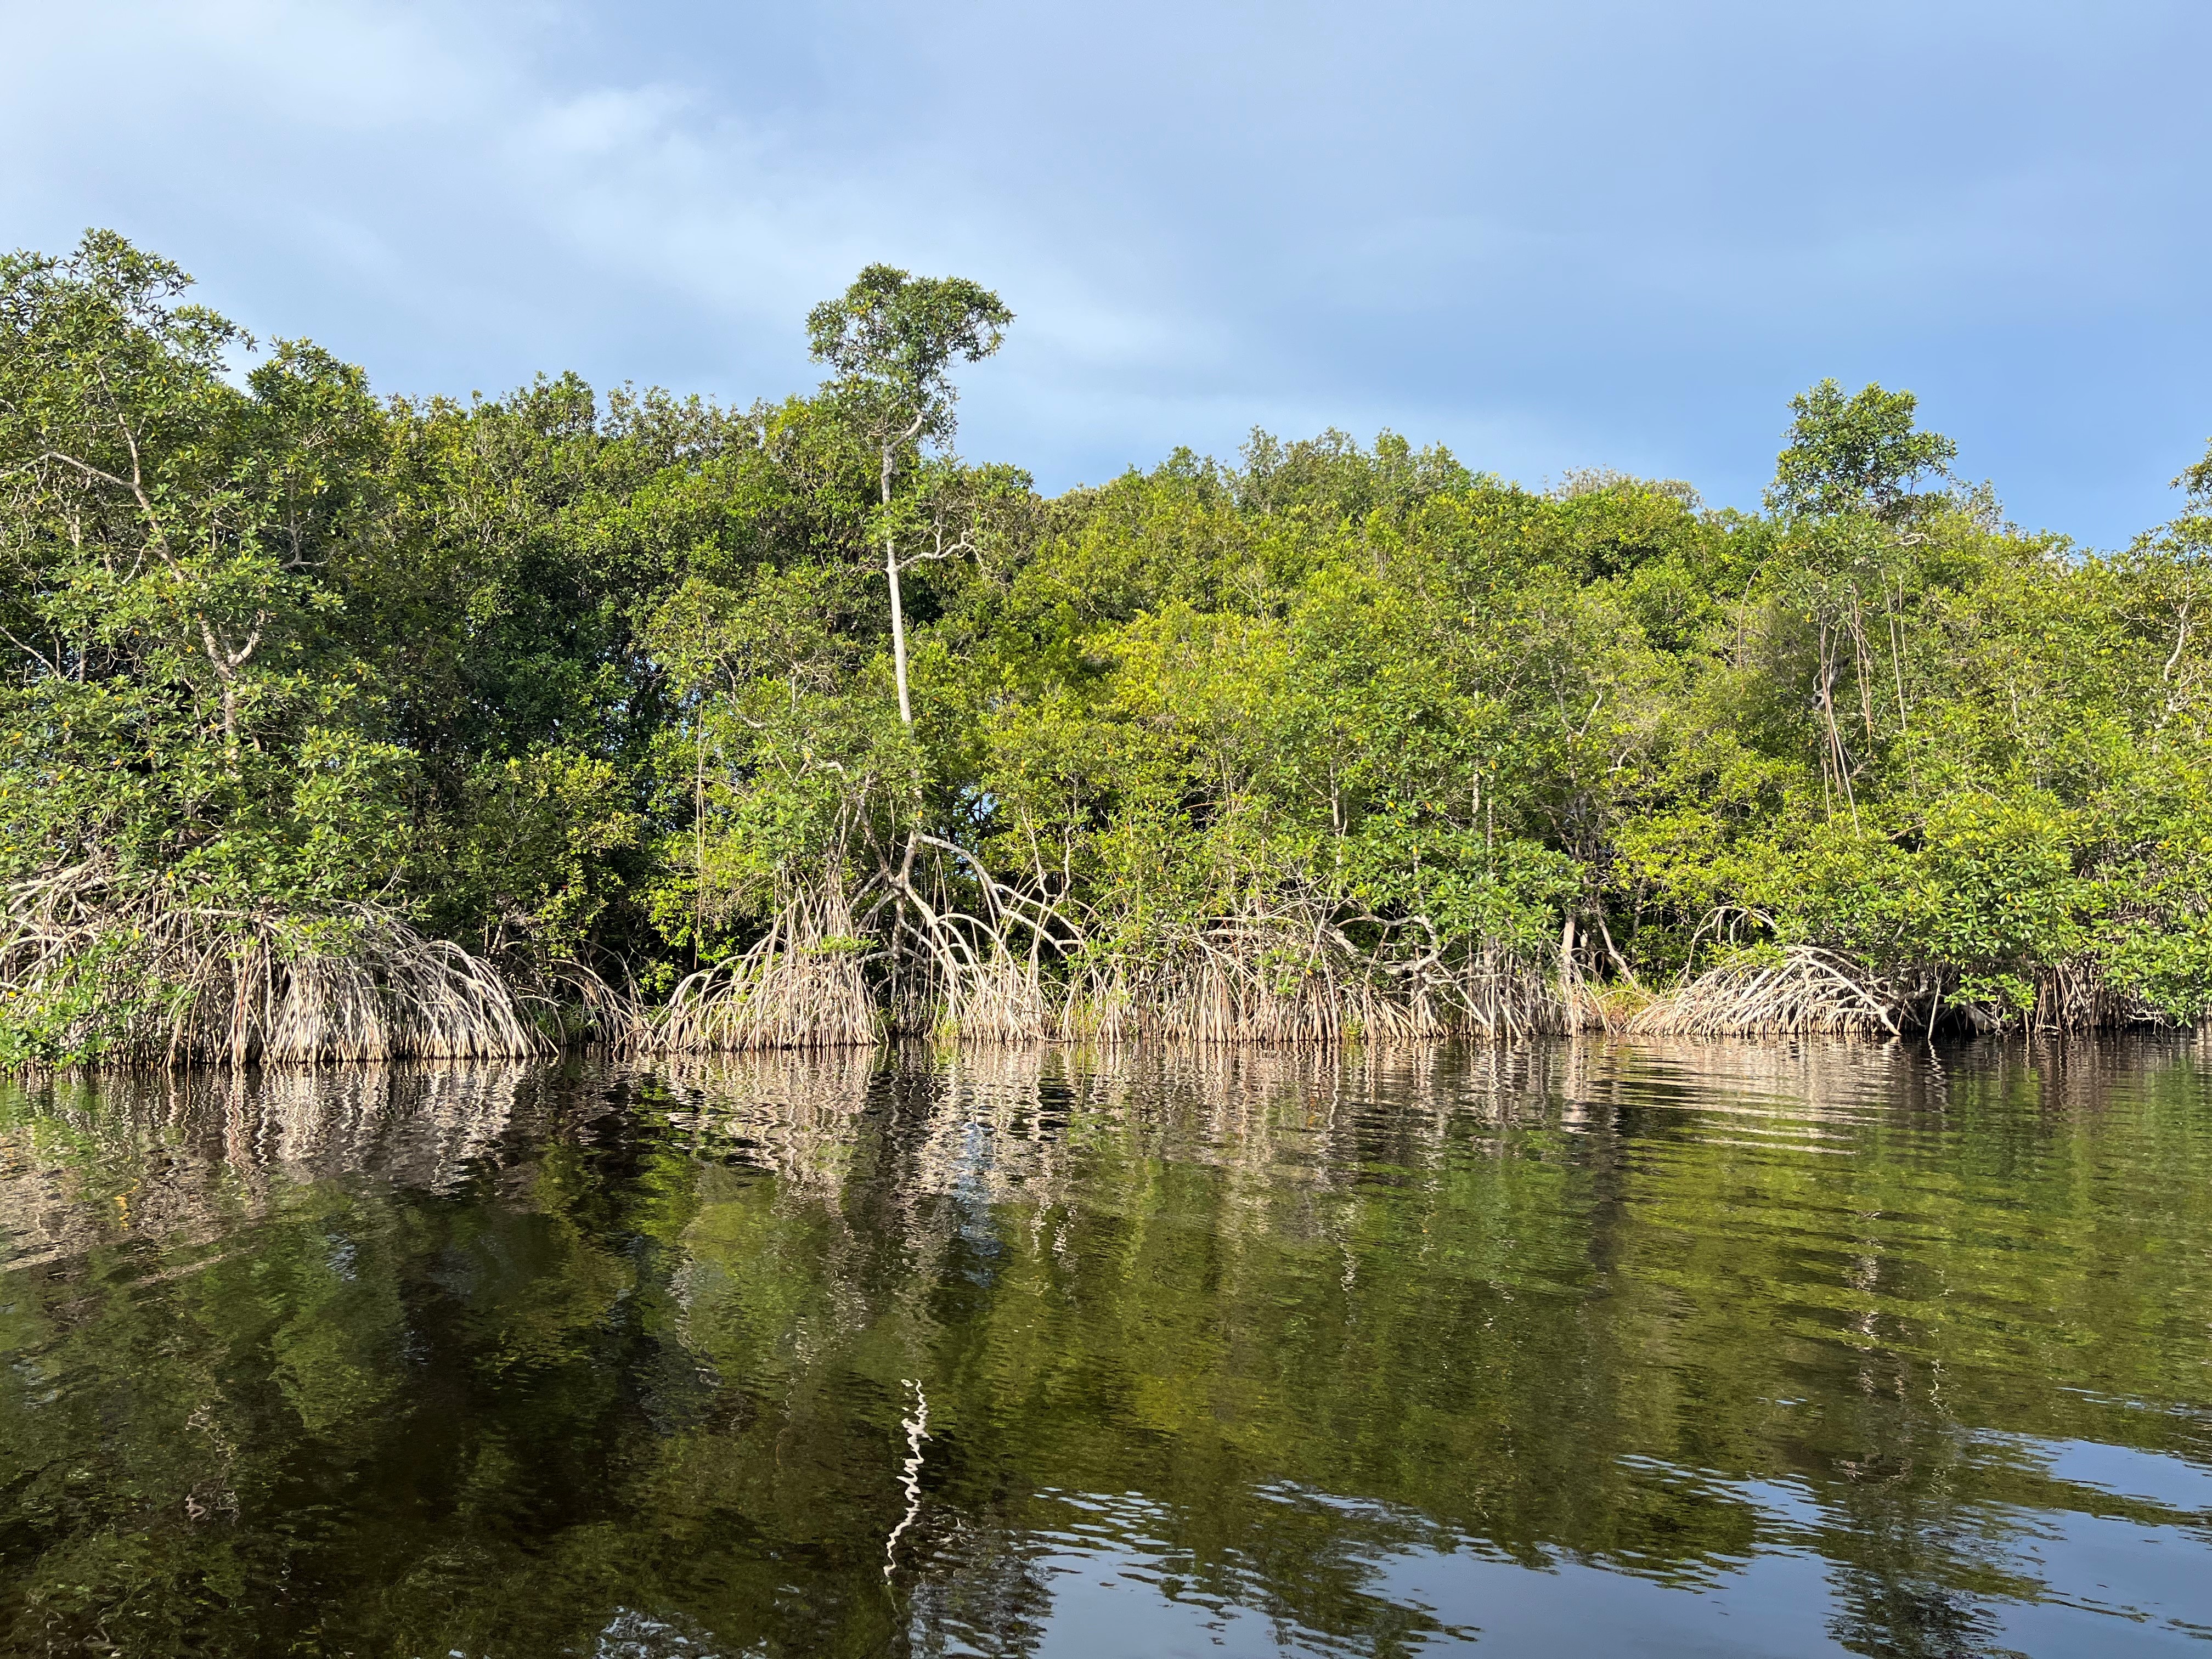 Gabon's mangroves are also an important carbo store (Emily Beament/PA)